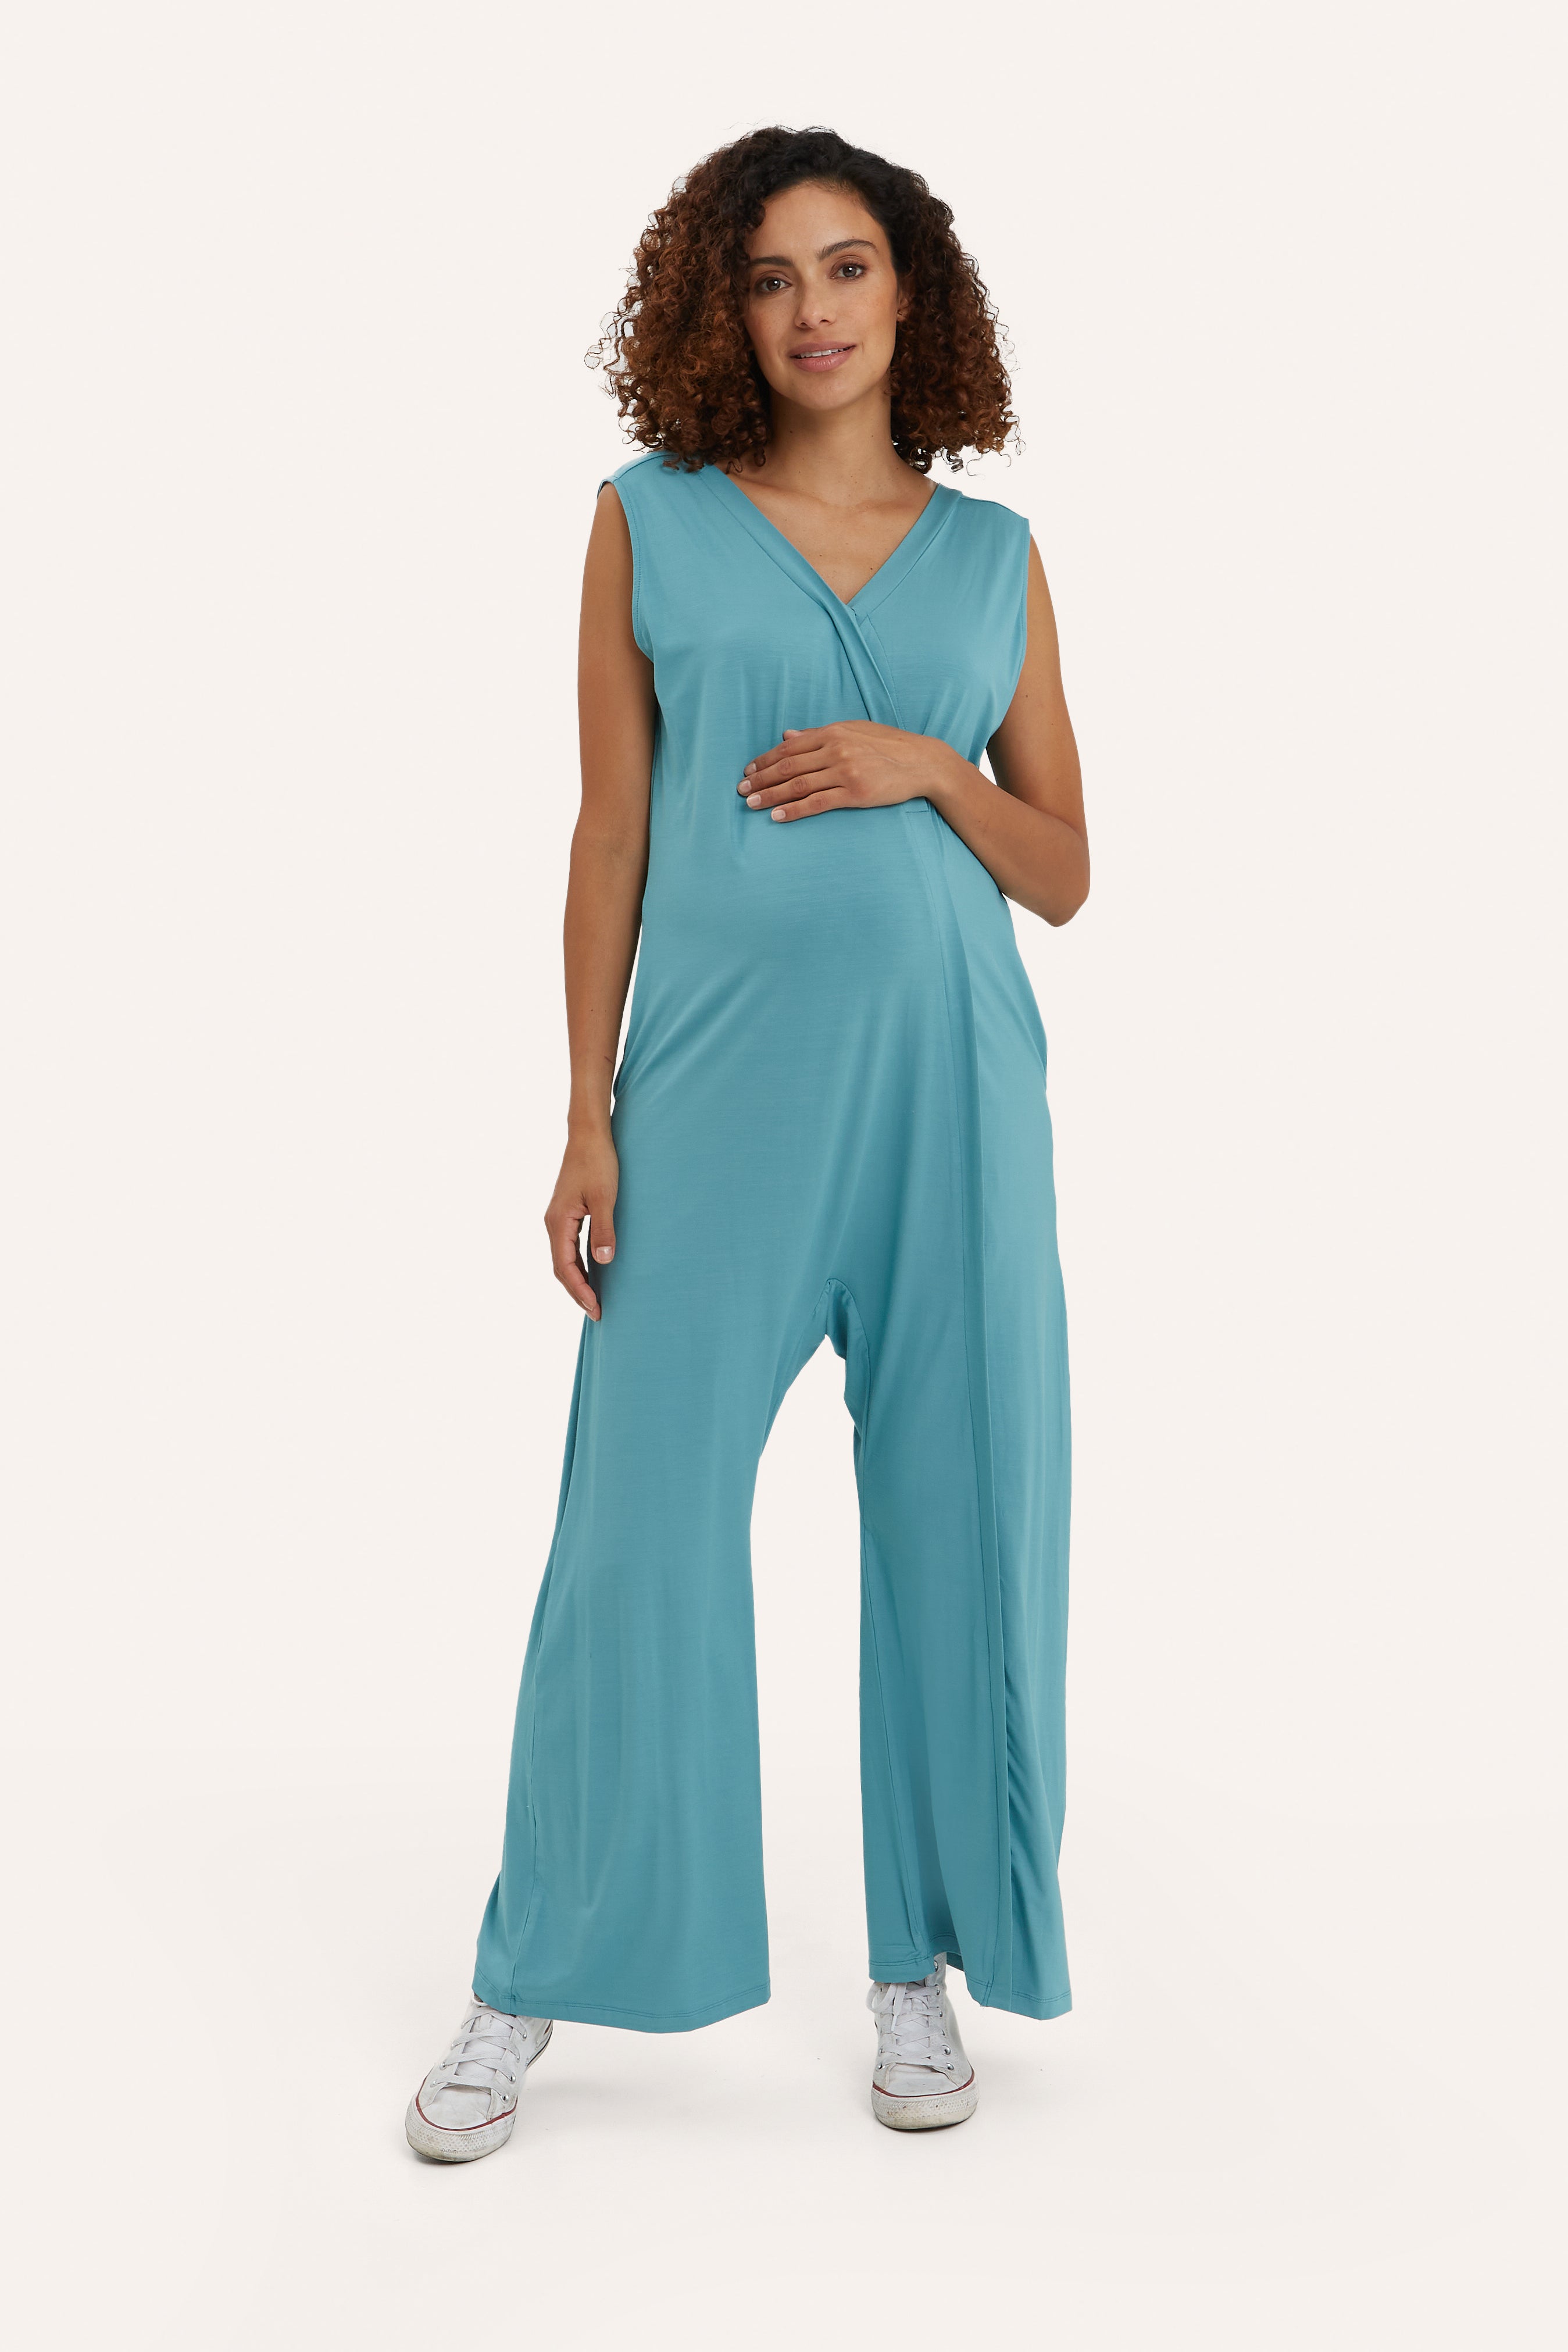 15 Stylish Maternity Jumpsuits for Every Occasion and Budget, jumpsuits 